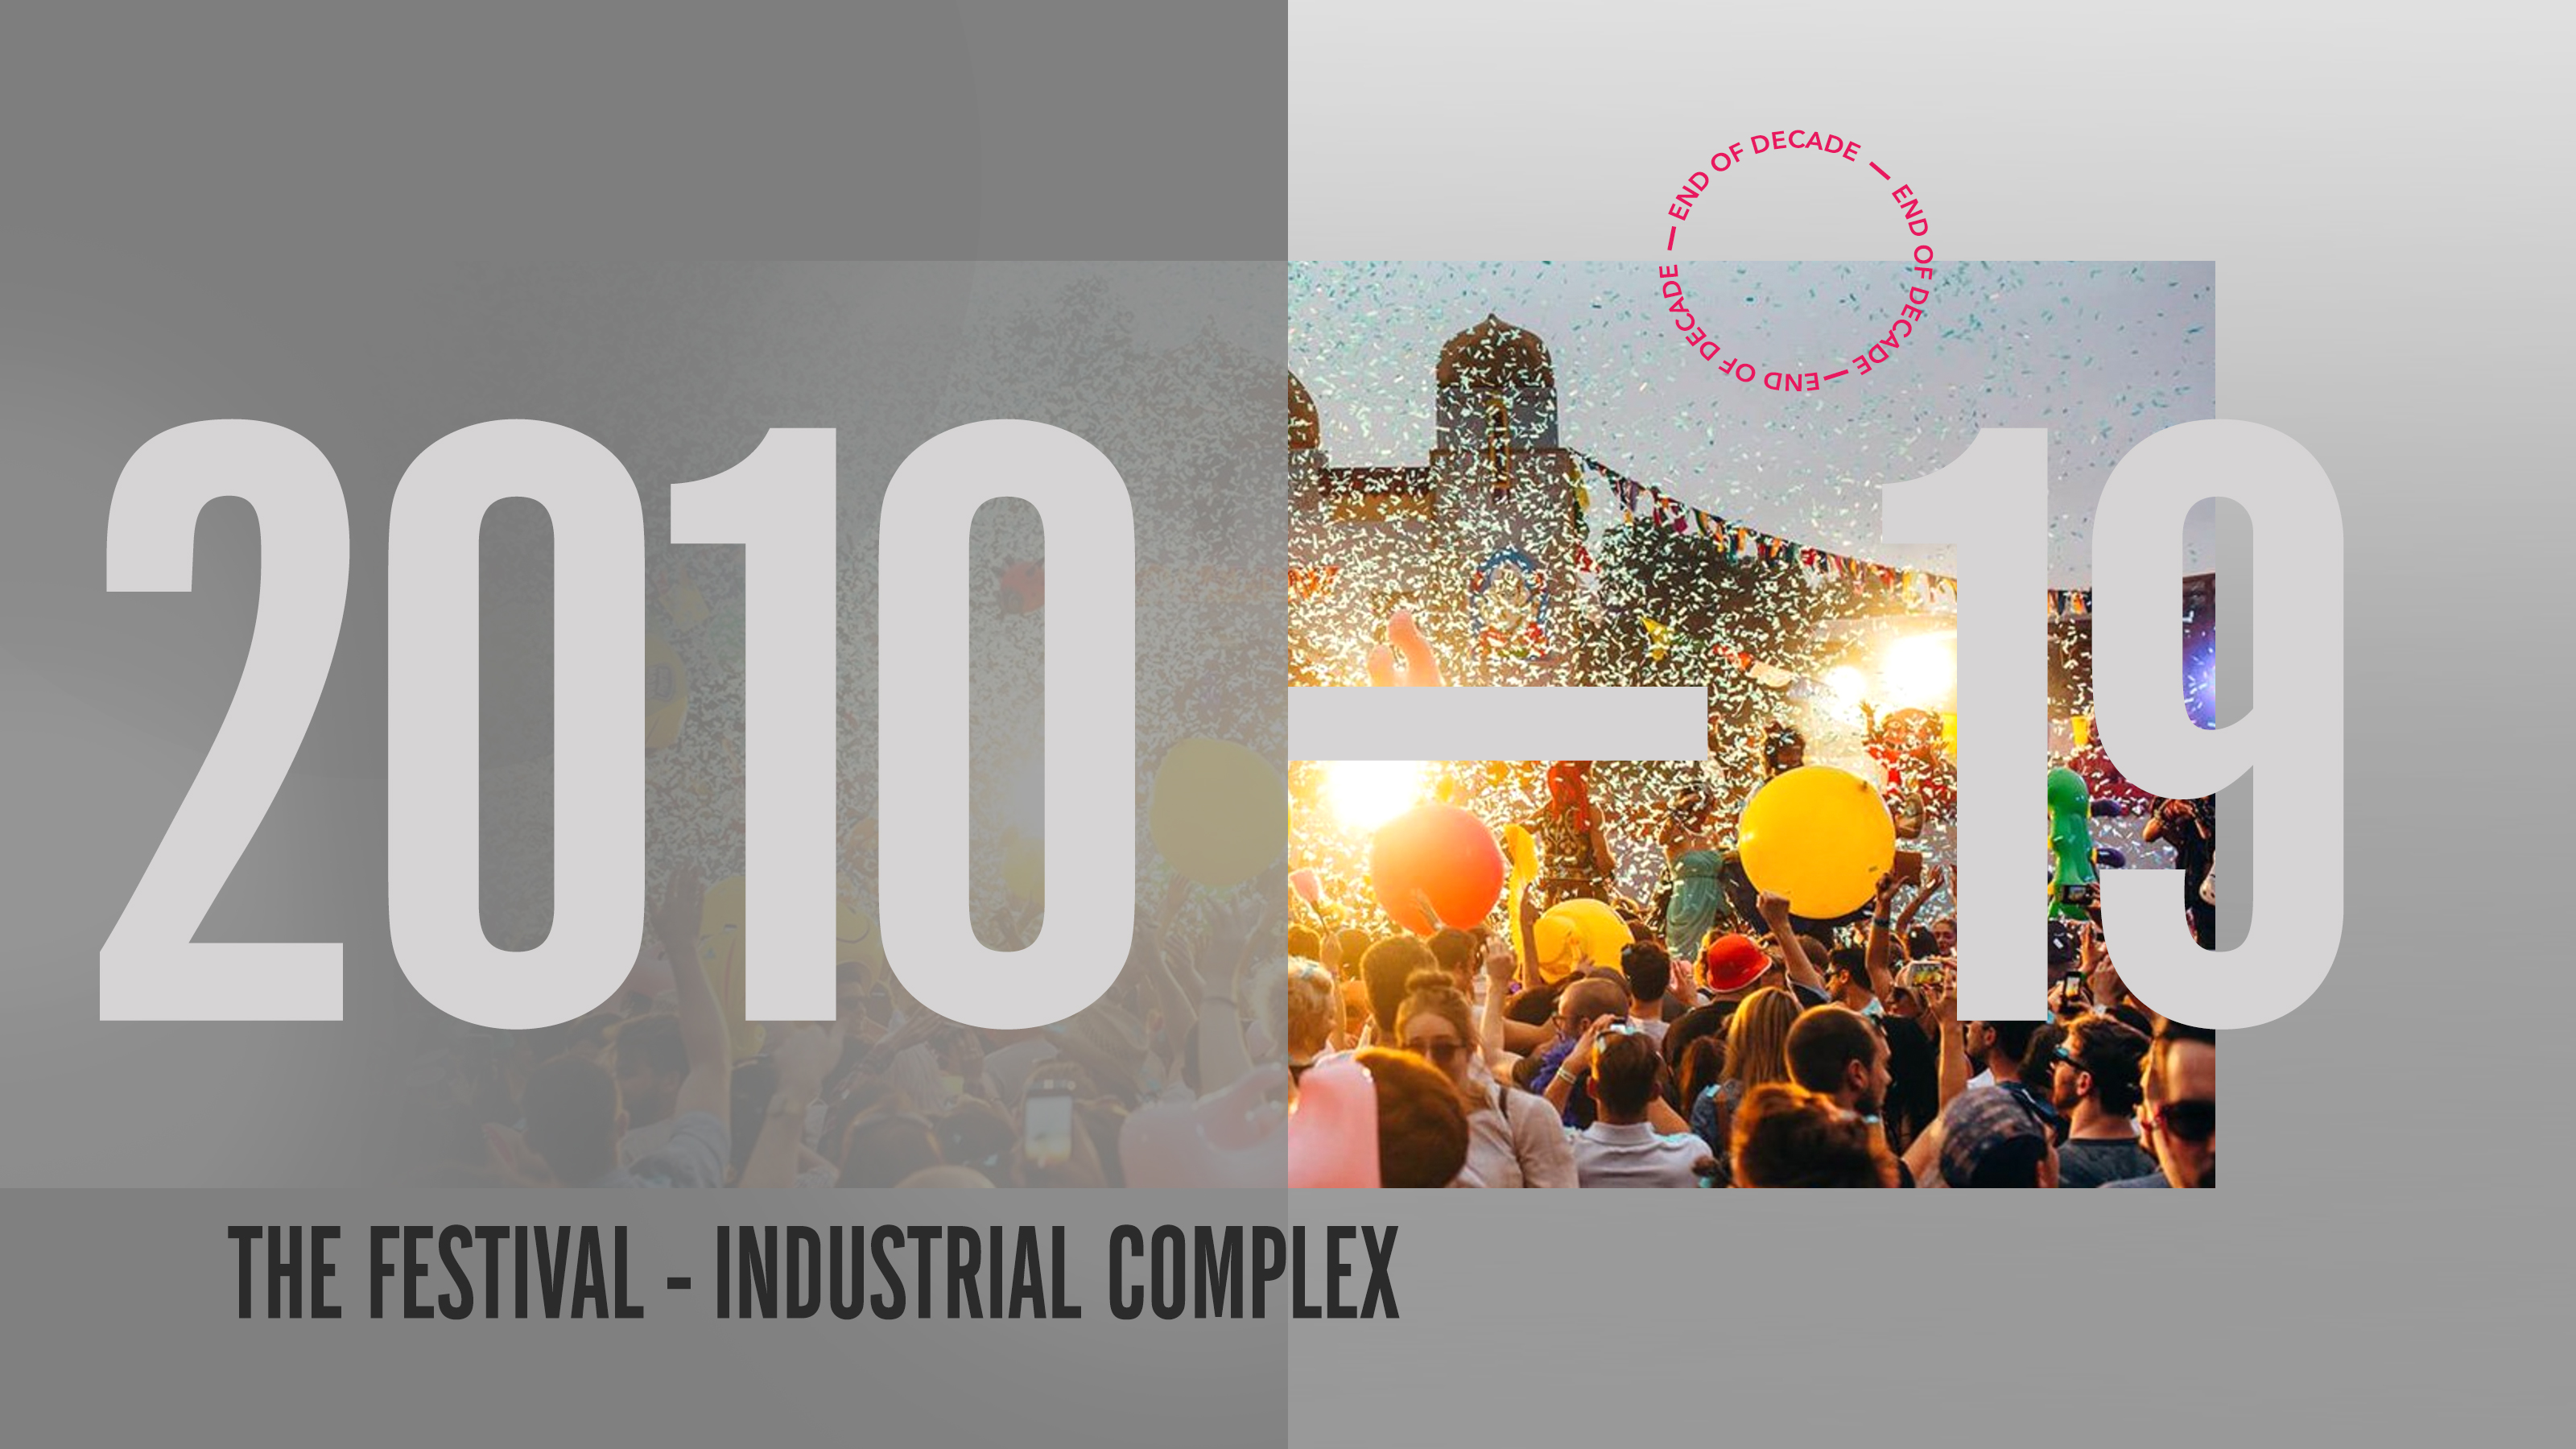 2010-19: Rise Of The Festival-Industrial Complex